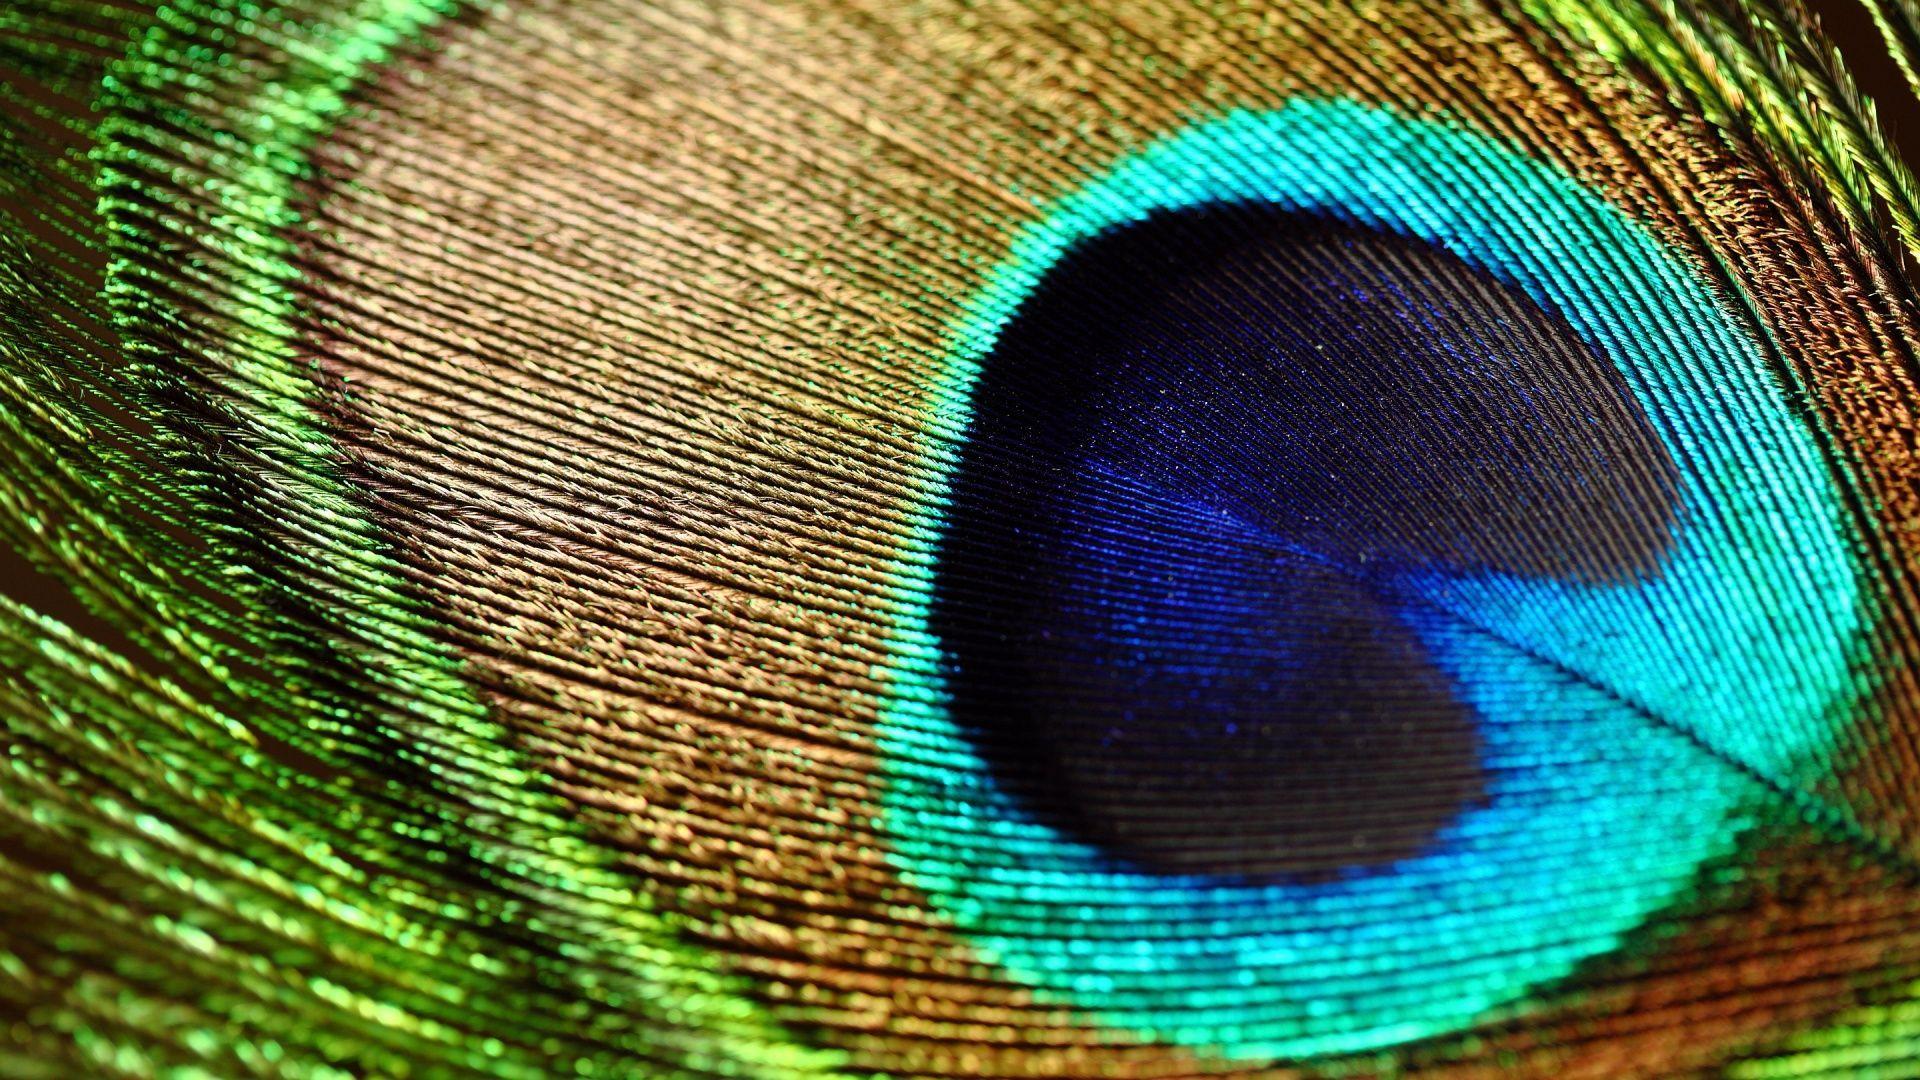 Peacock, Feather, Wallpaper, Hd, High Resolution Image, Samsung